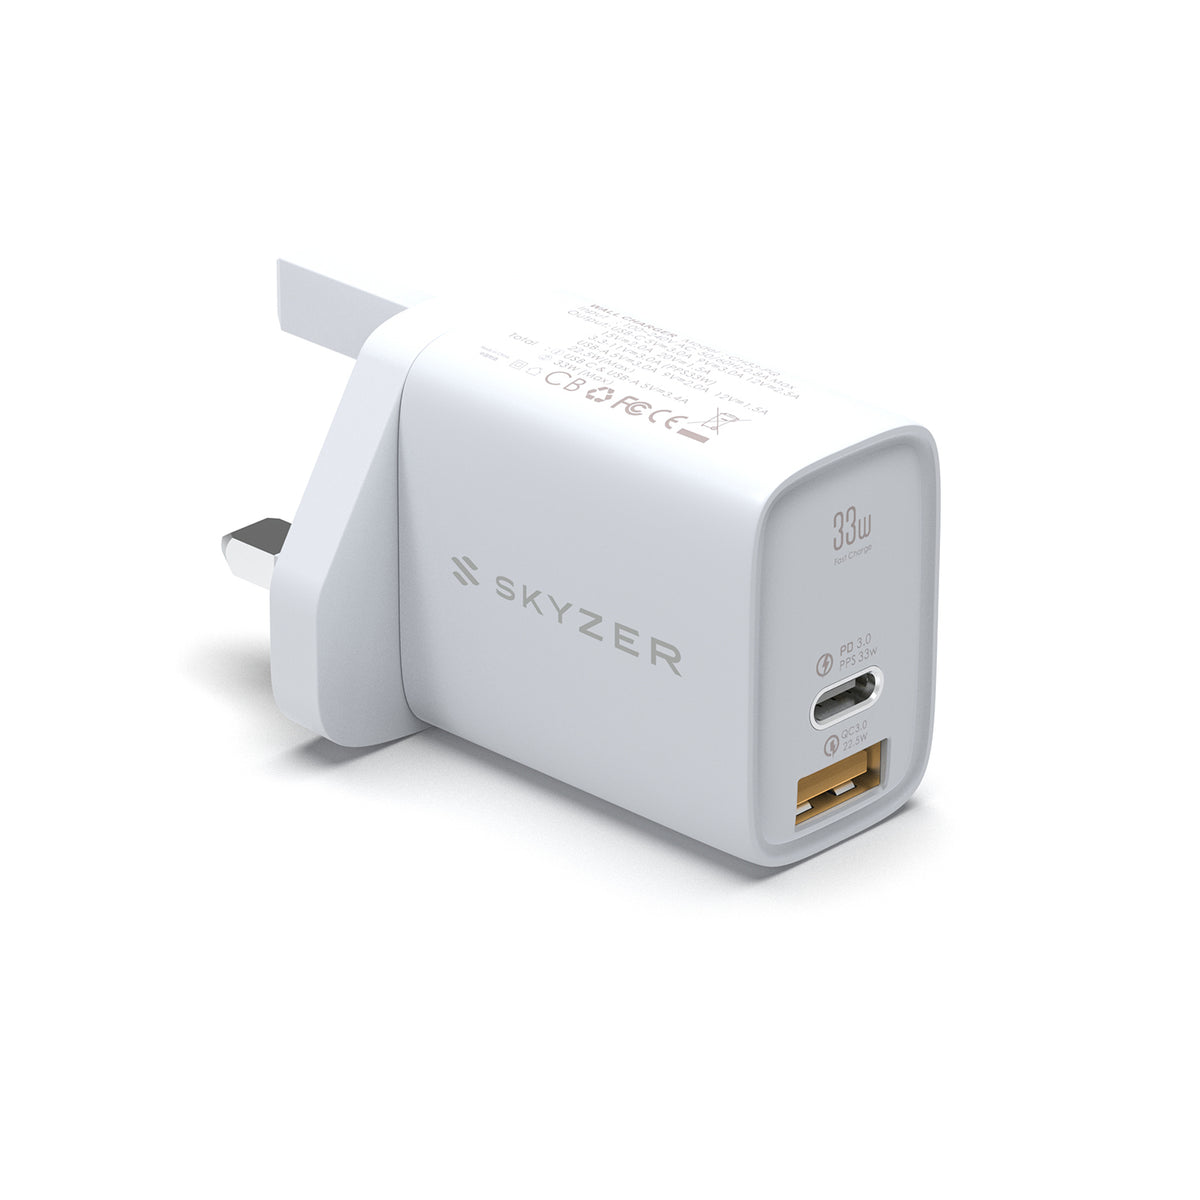 Skyzer PD157 SpeedPro 33W Fast Charging Wall Charger with 1 USB-C + 1 USB-A Port